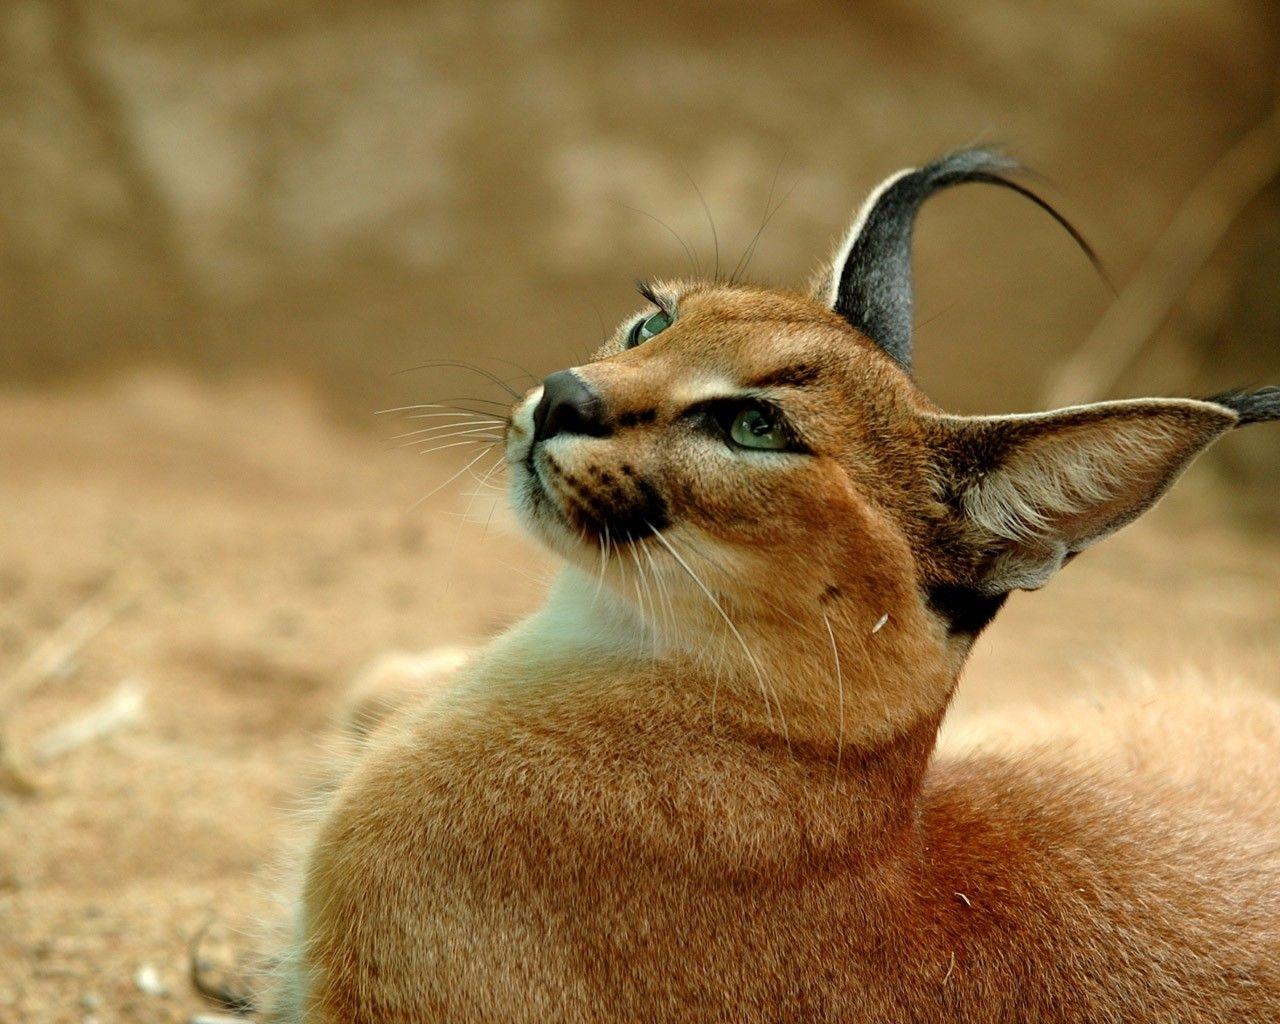 Cats: Cats Big Caracal Cat Image Baby HD 16:9 High Definition 1080p